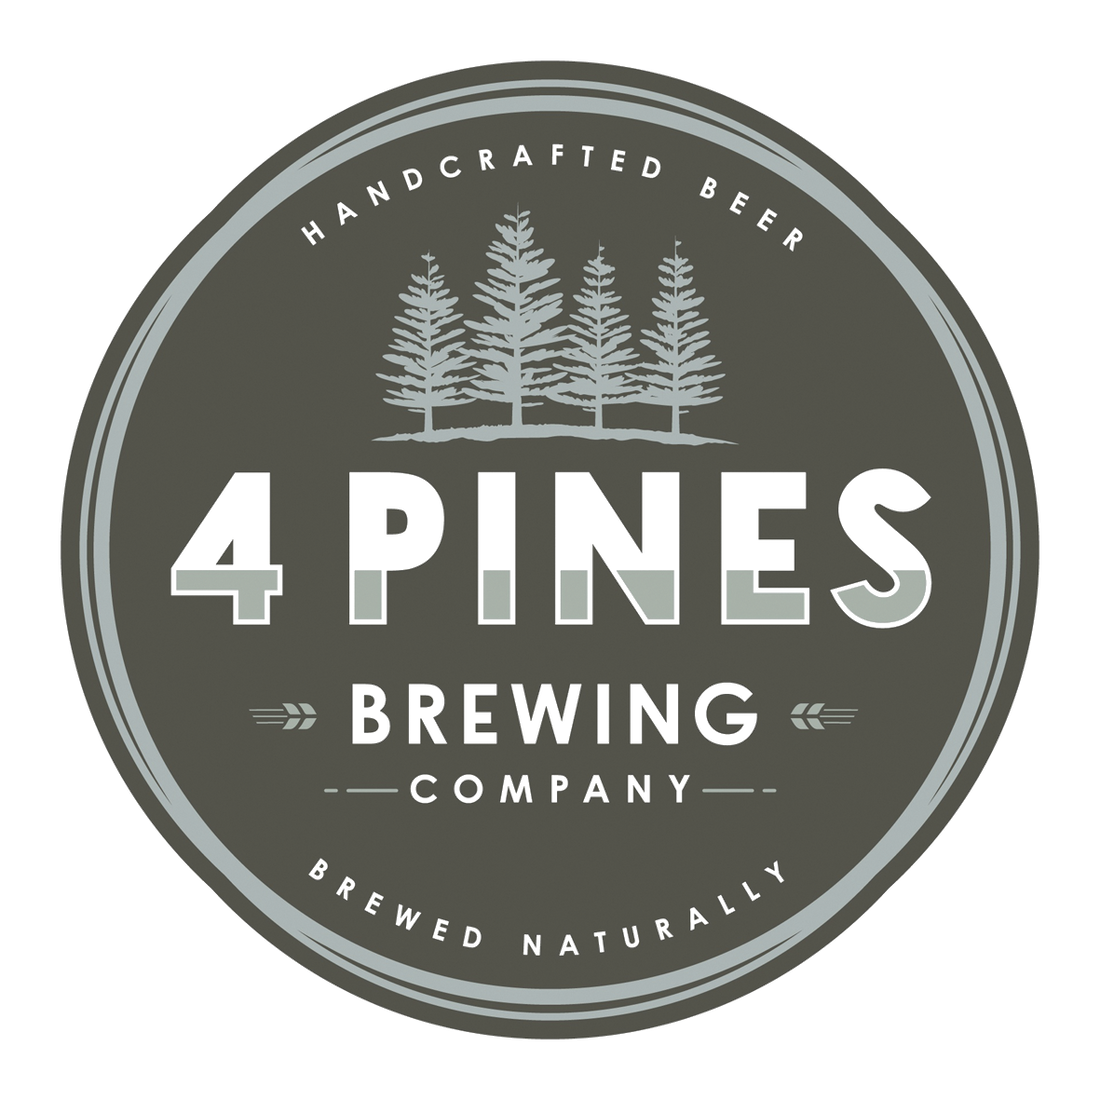 4 Pines Brewing Company Manly